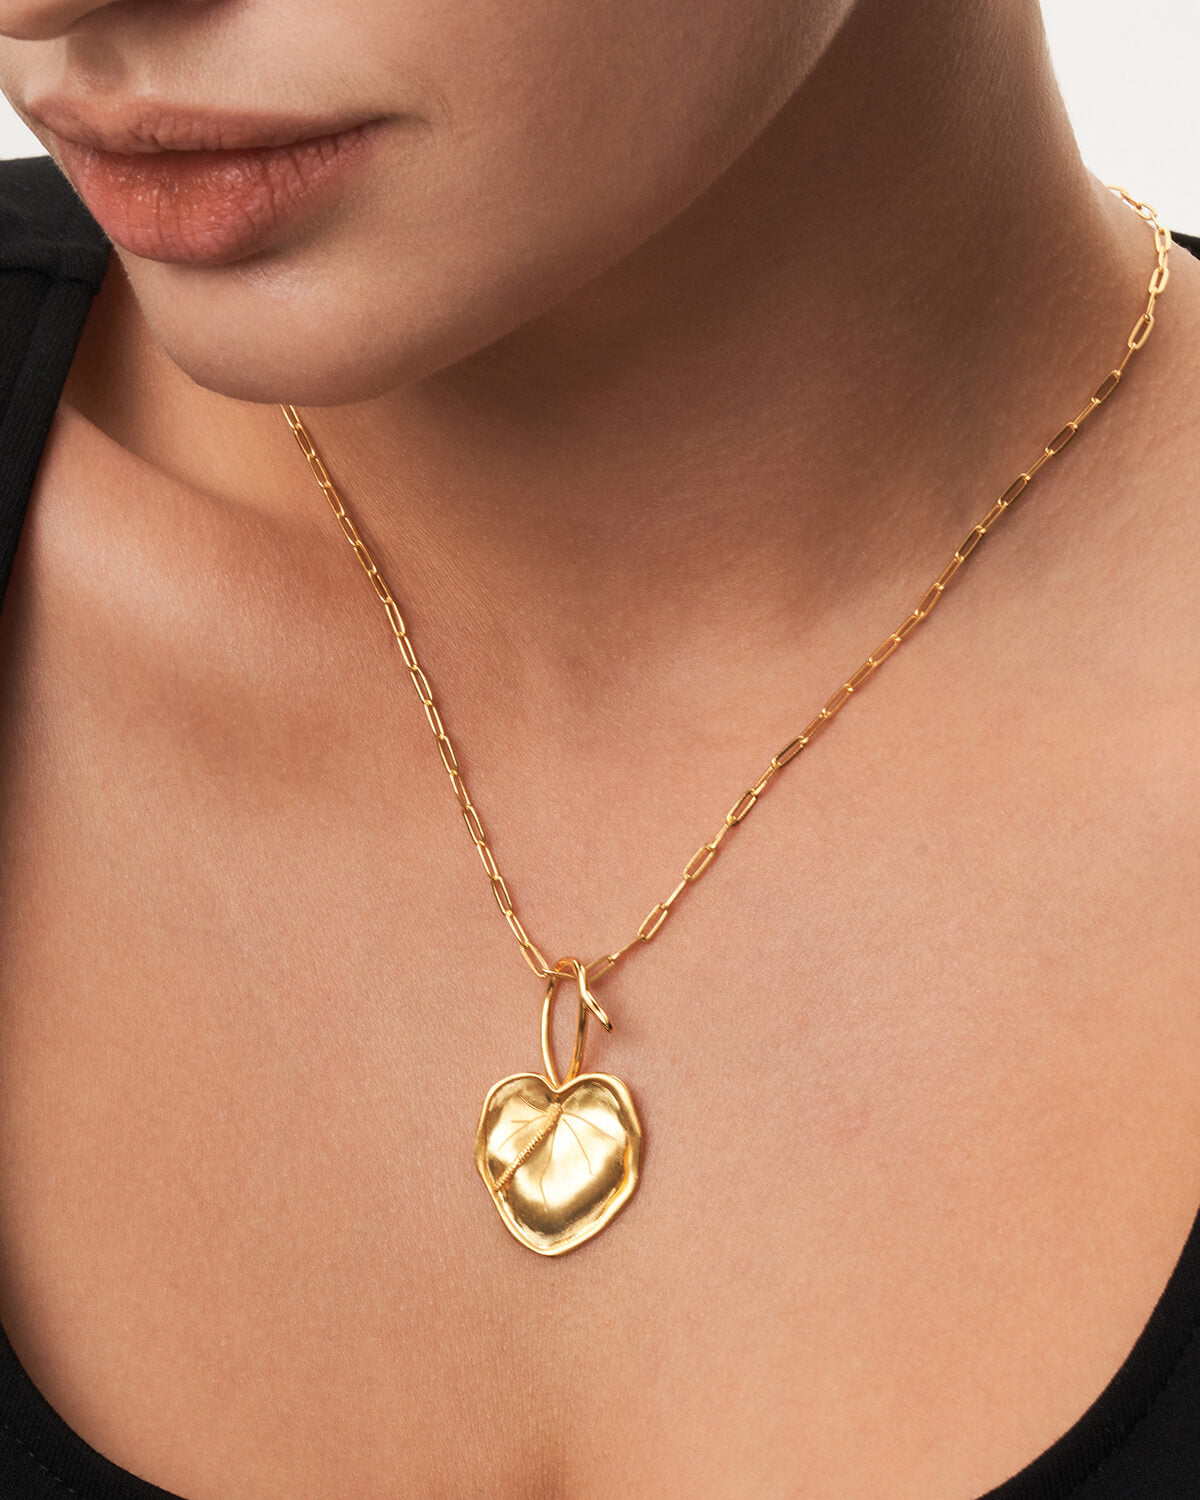 a woman wearing a necklace with a heart shaped pendant